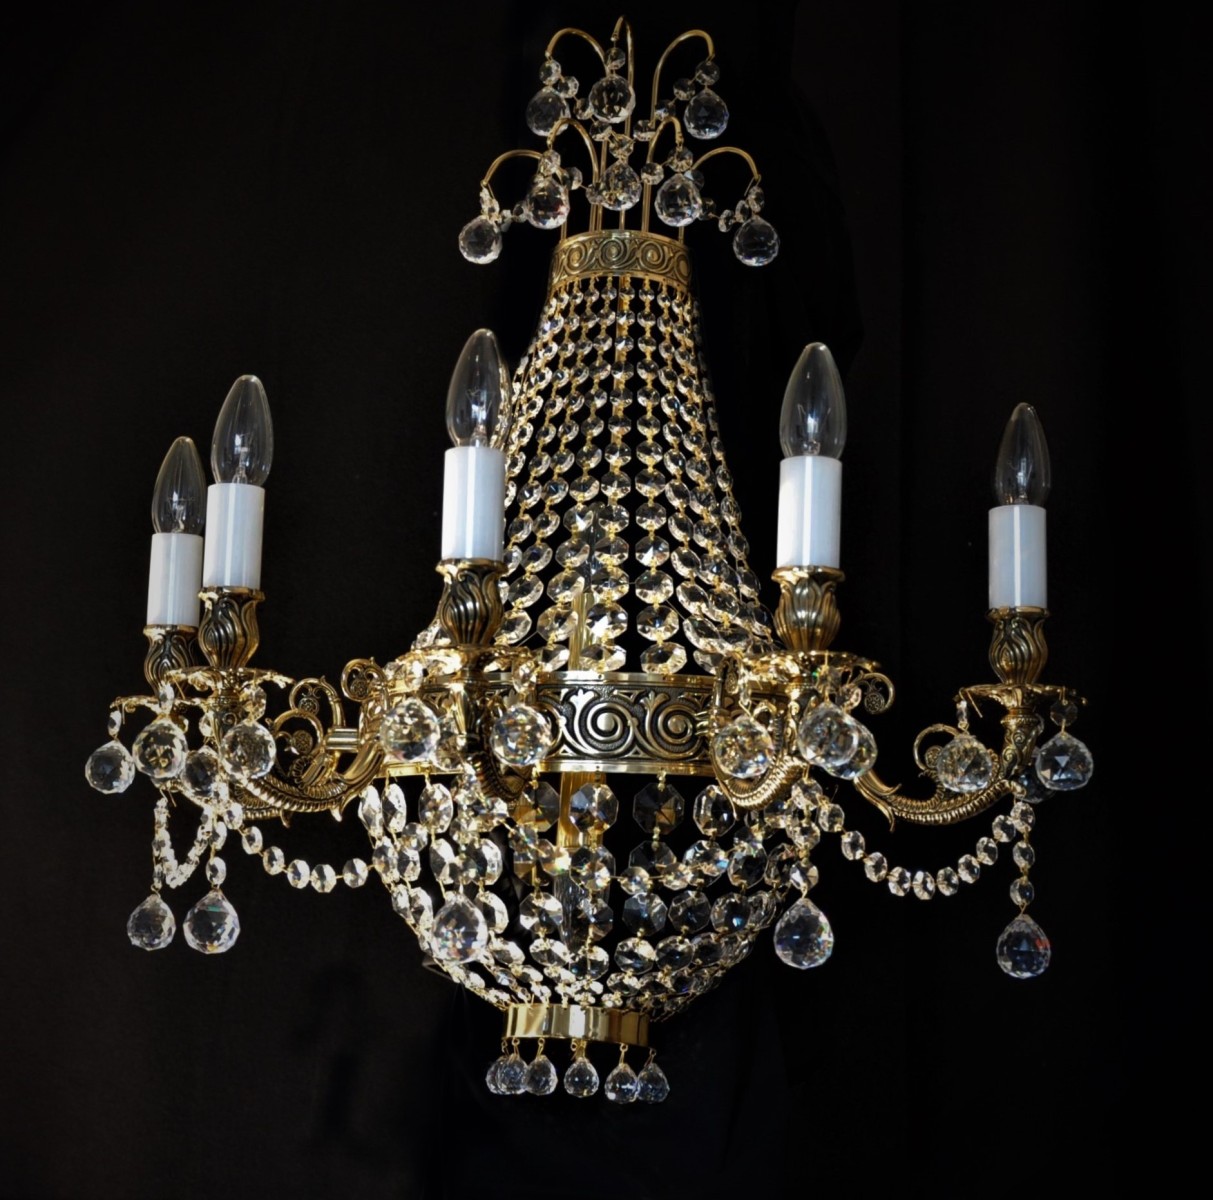 5-bulbs Small cast brass basket chandelier with strass stones and